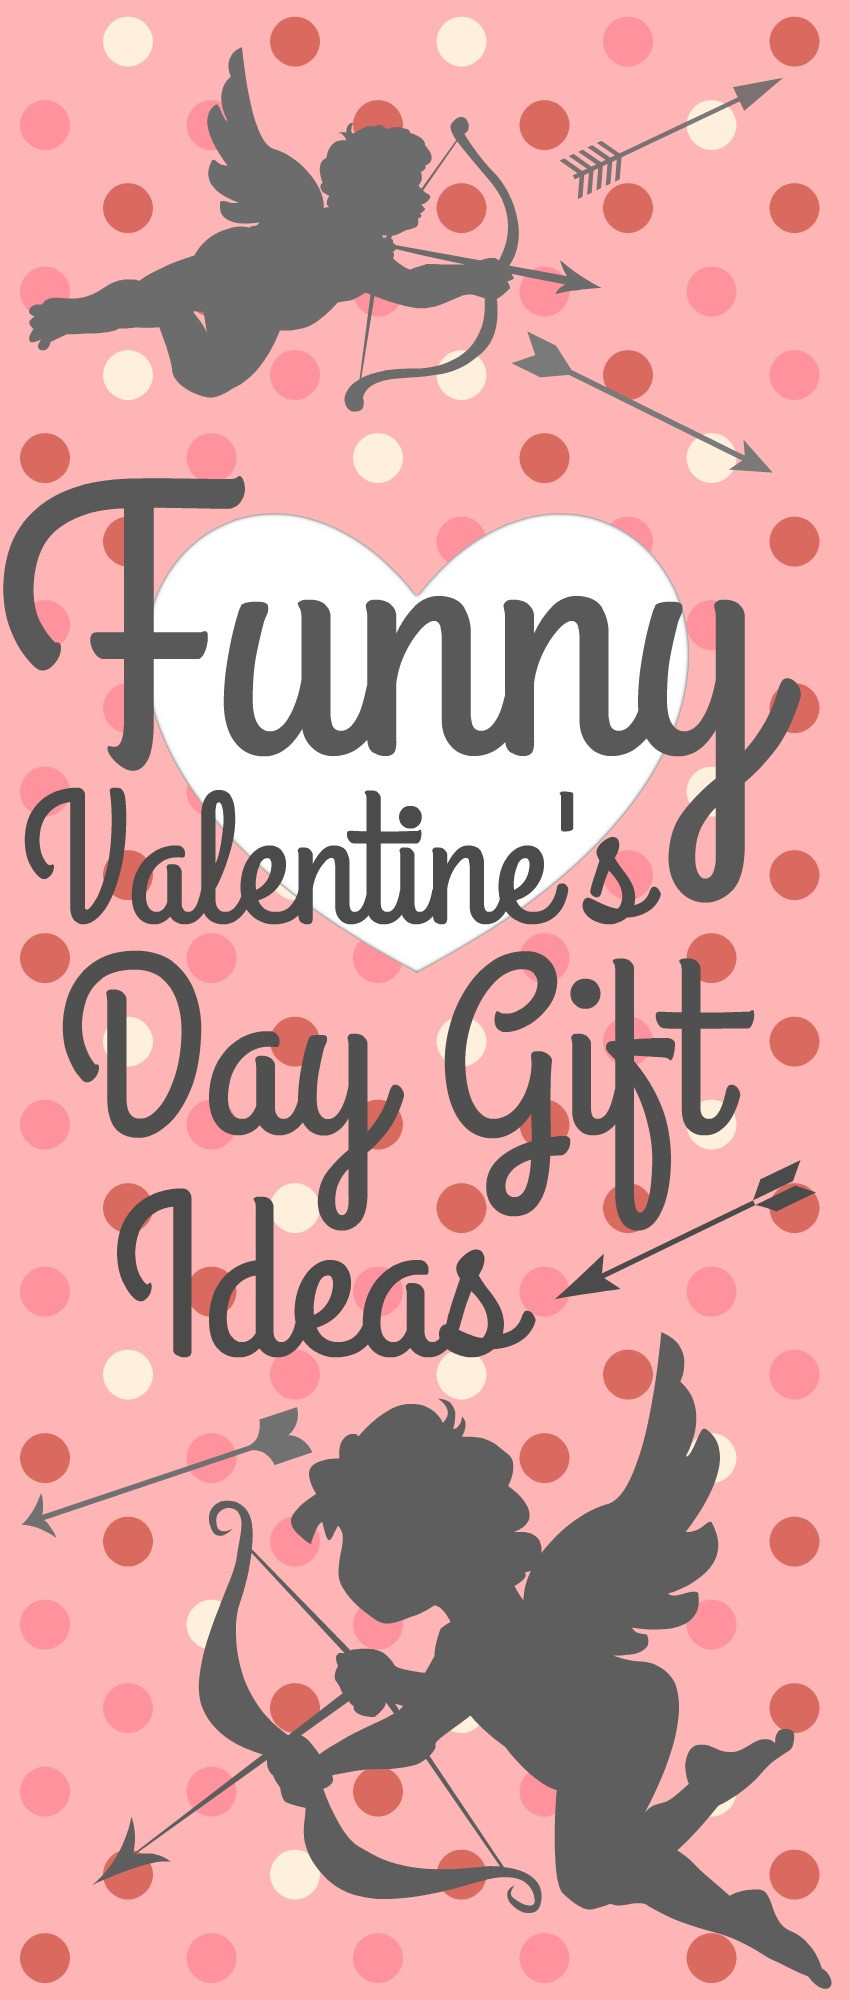 Funny Valentines Day Gift Ideas
 Funny Valentine s Day Gifts